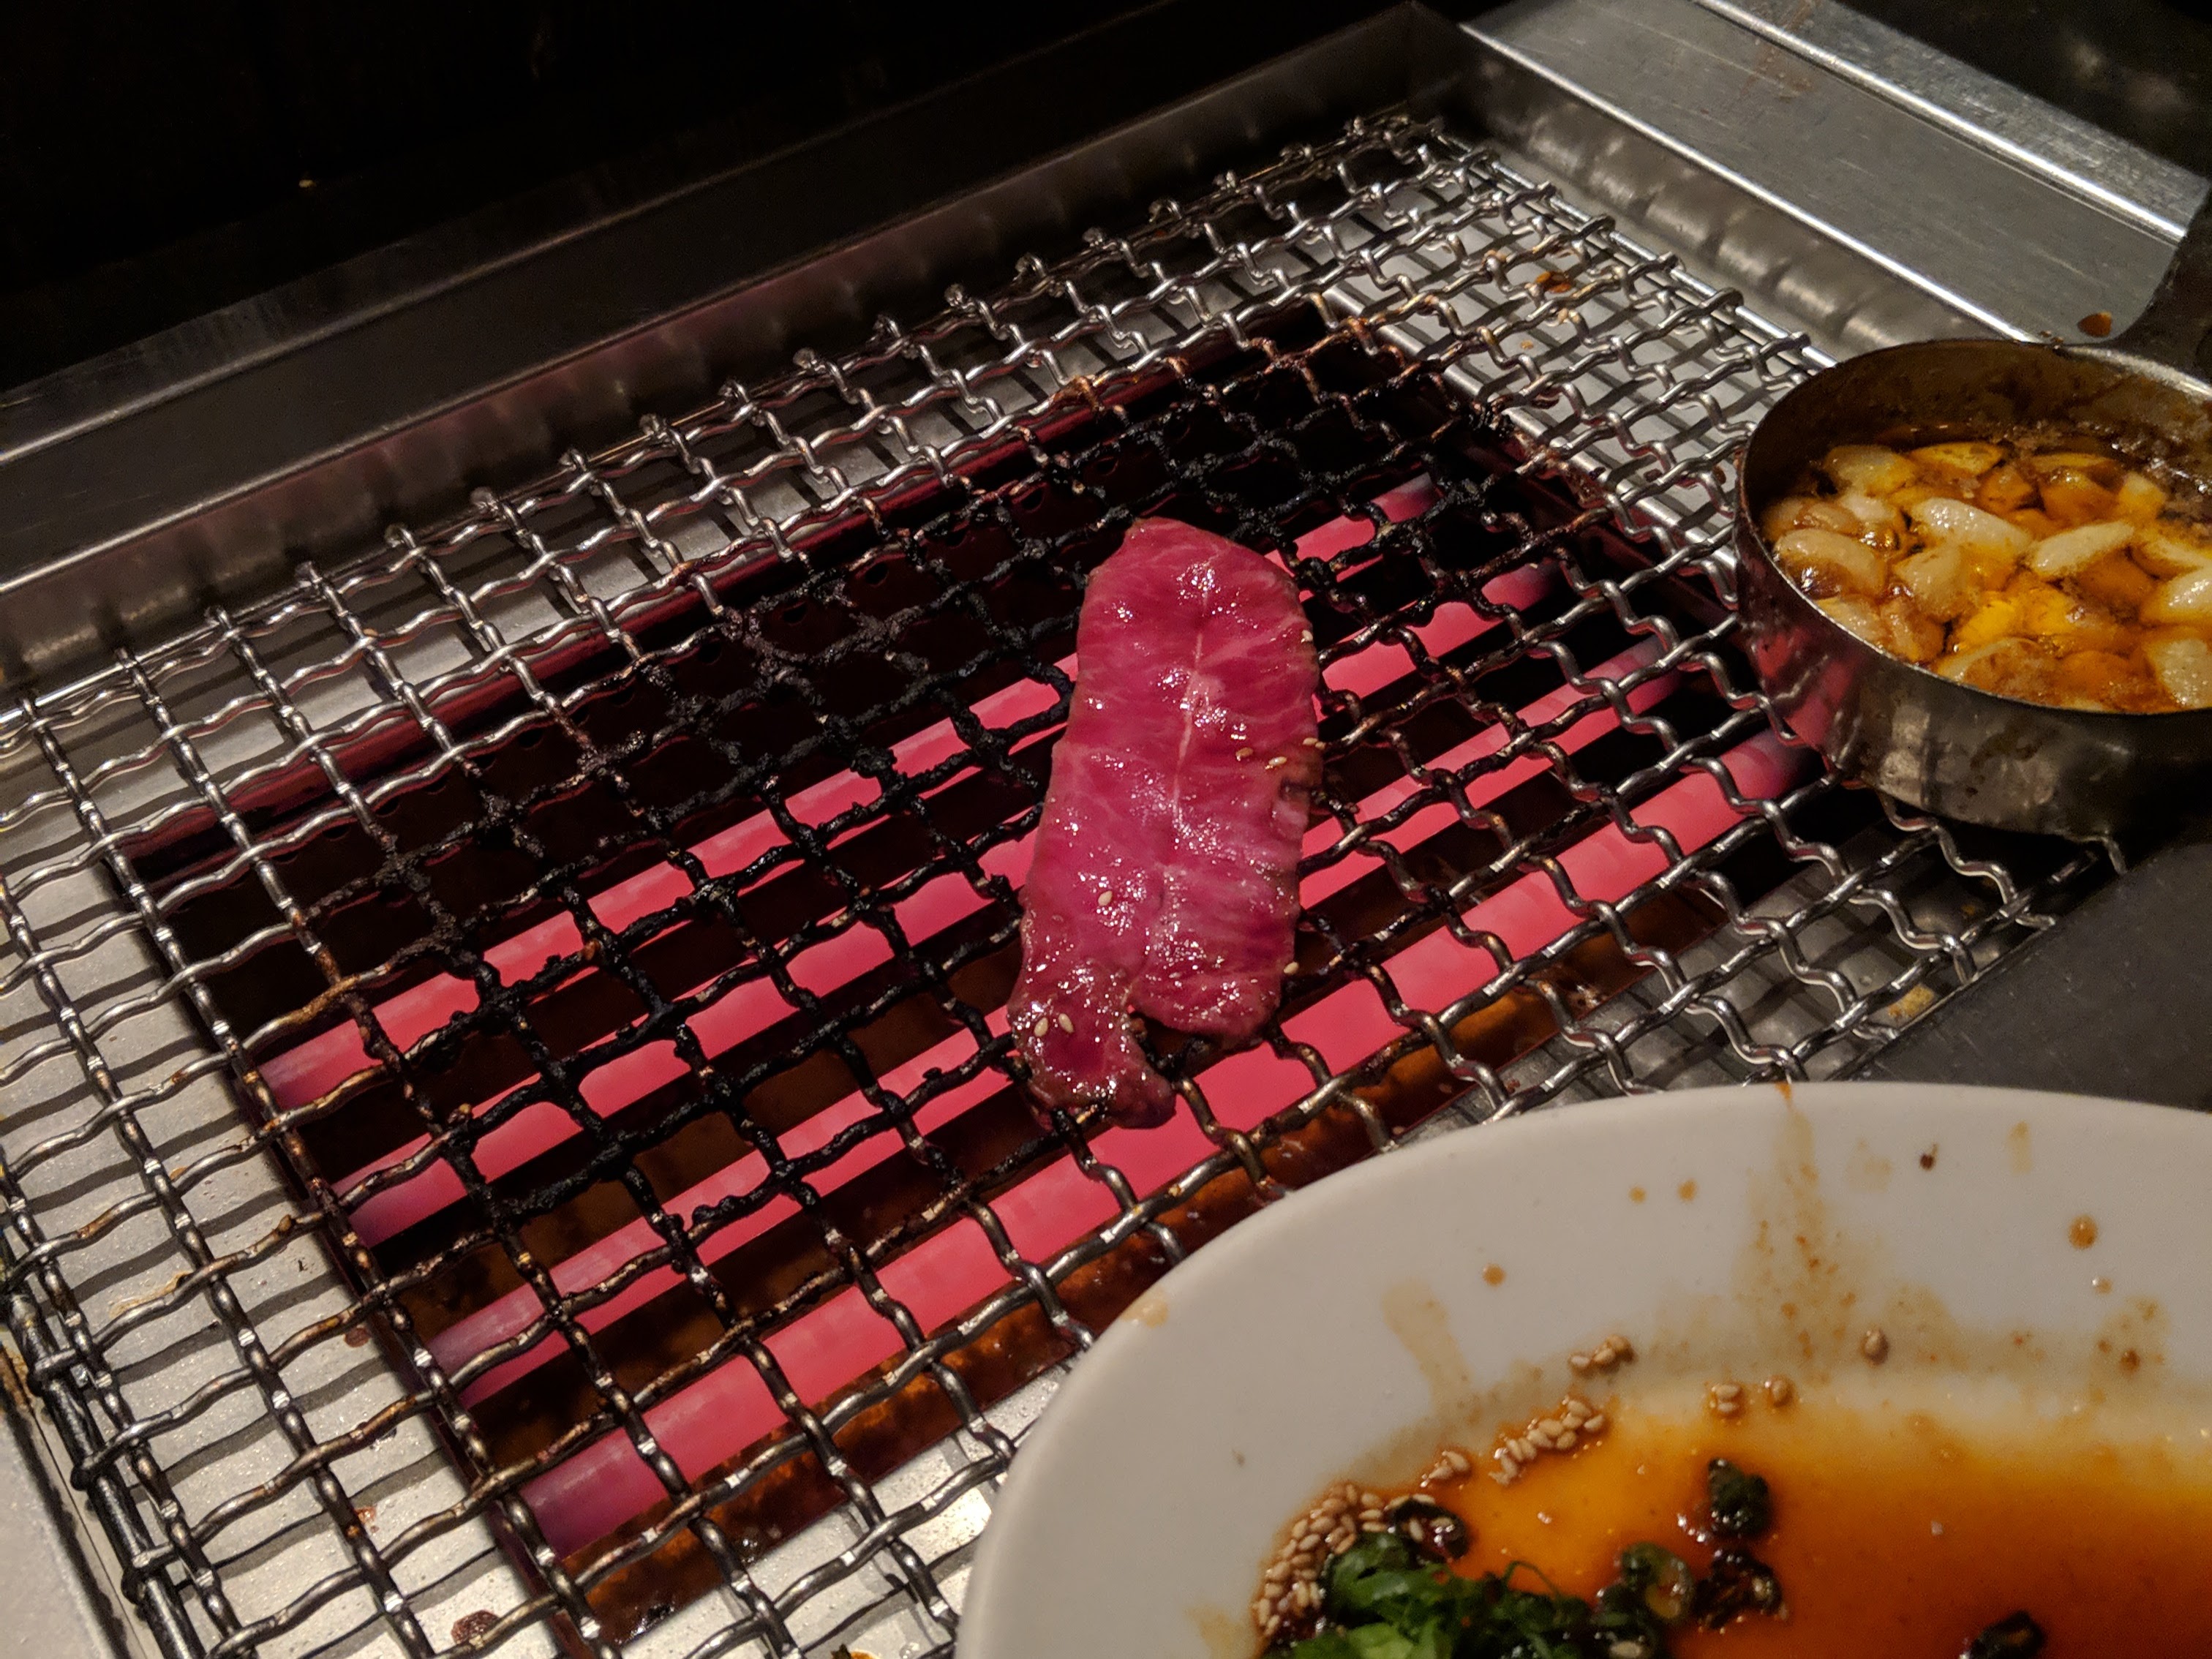 A thin slice of meat, sizzling on a personal grill.